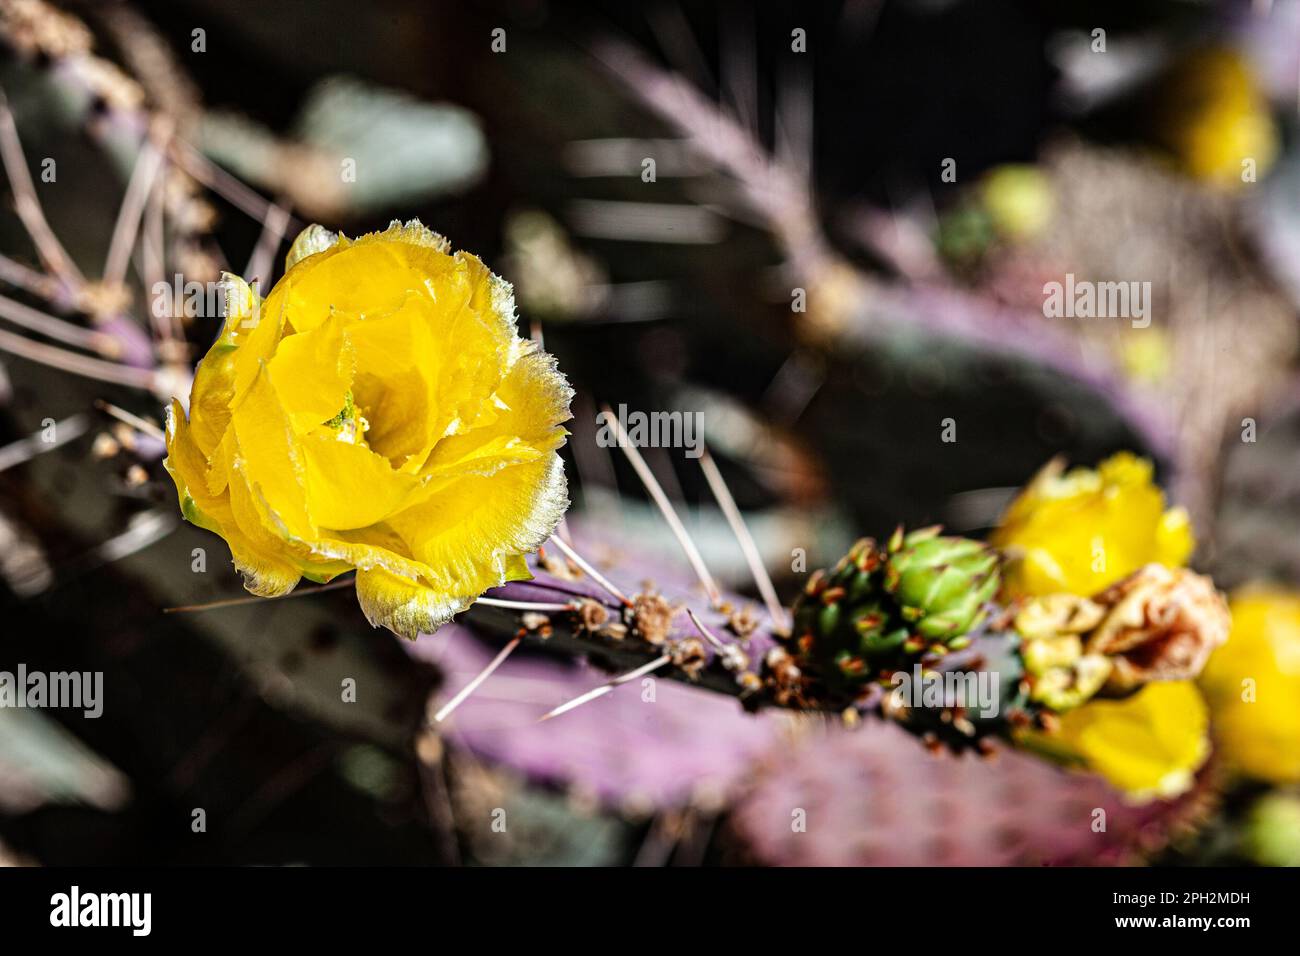 Long-spined purpleish prickly pear cactus flower found in the Mojave desert in Southern California Stock Photo